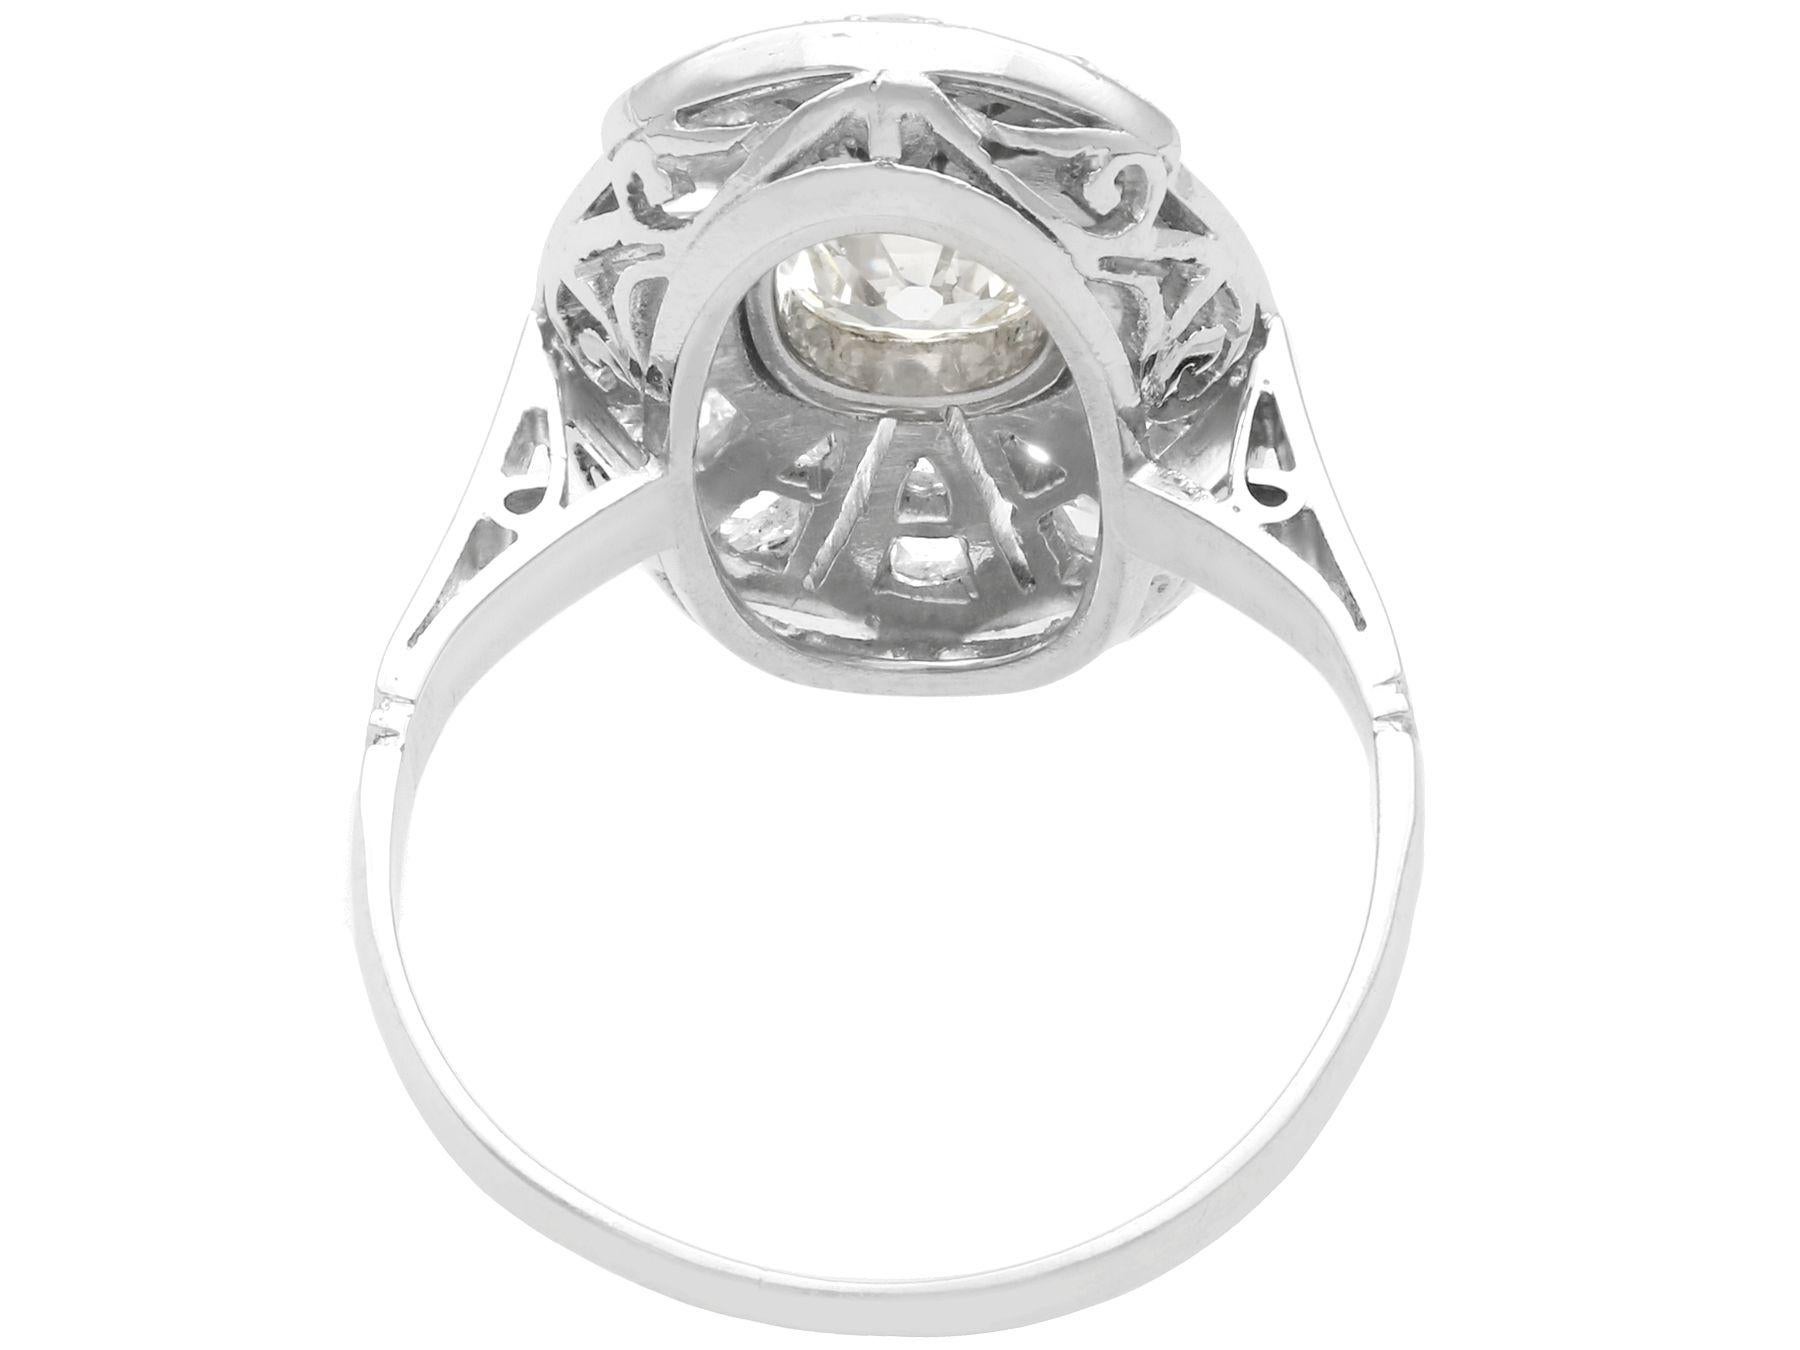 Antique 1.79 Carat Diamond and White Gold Cocktail Ring, Circa 1930 In Excellent Condition For Sale In Jesmond, Newcastle Upon Tyne